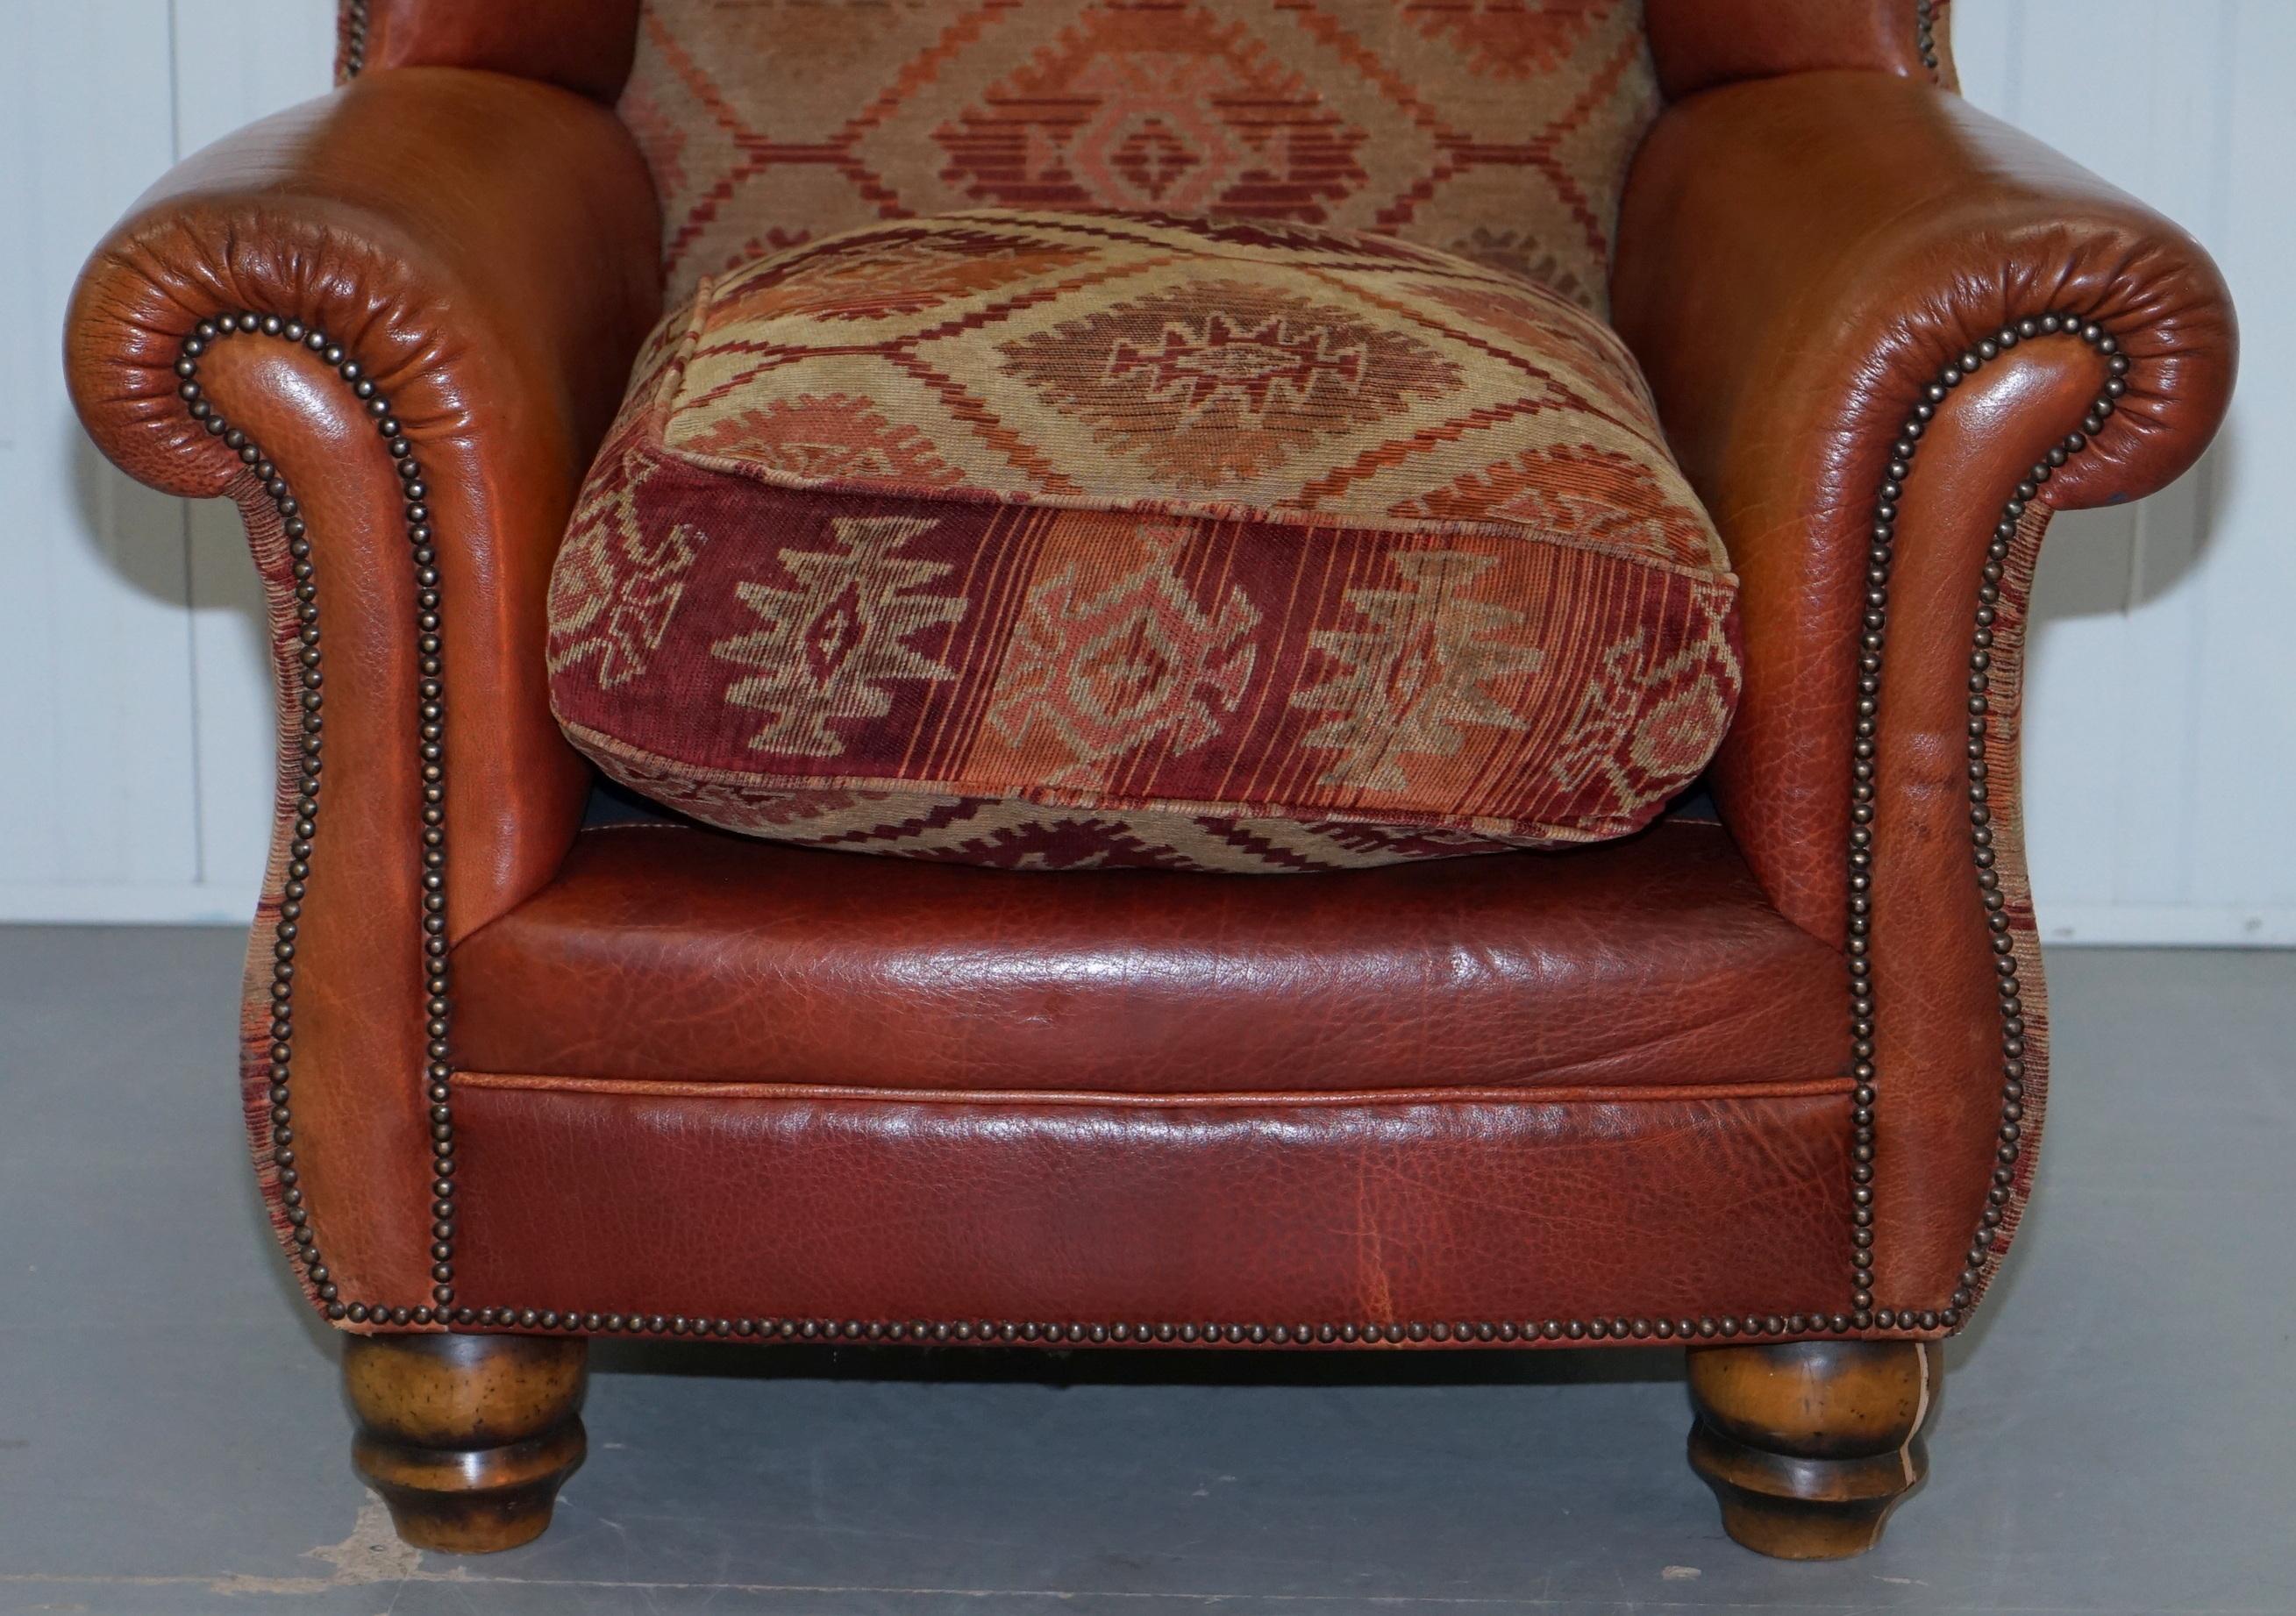 Contemporary Tetrad Eastwood Brown Leather and Kilim Upholstery Armchair Lovely